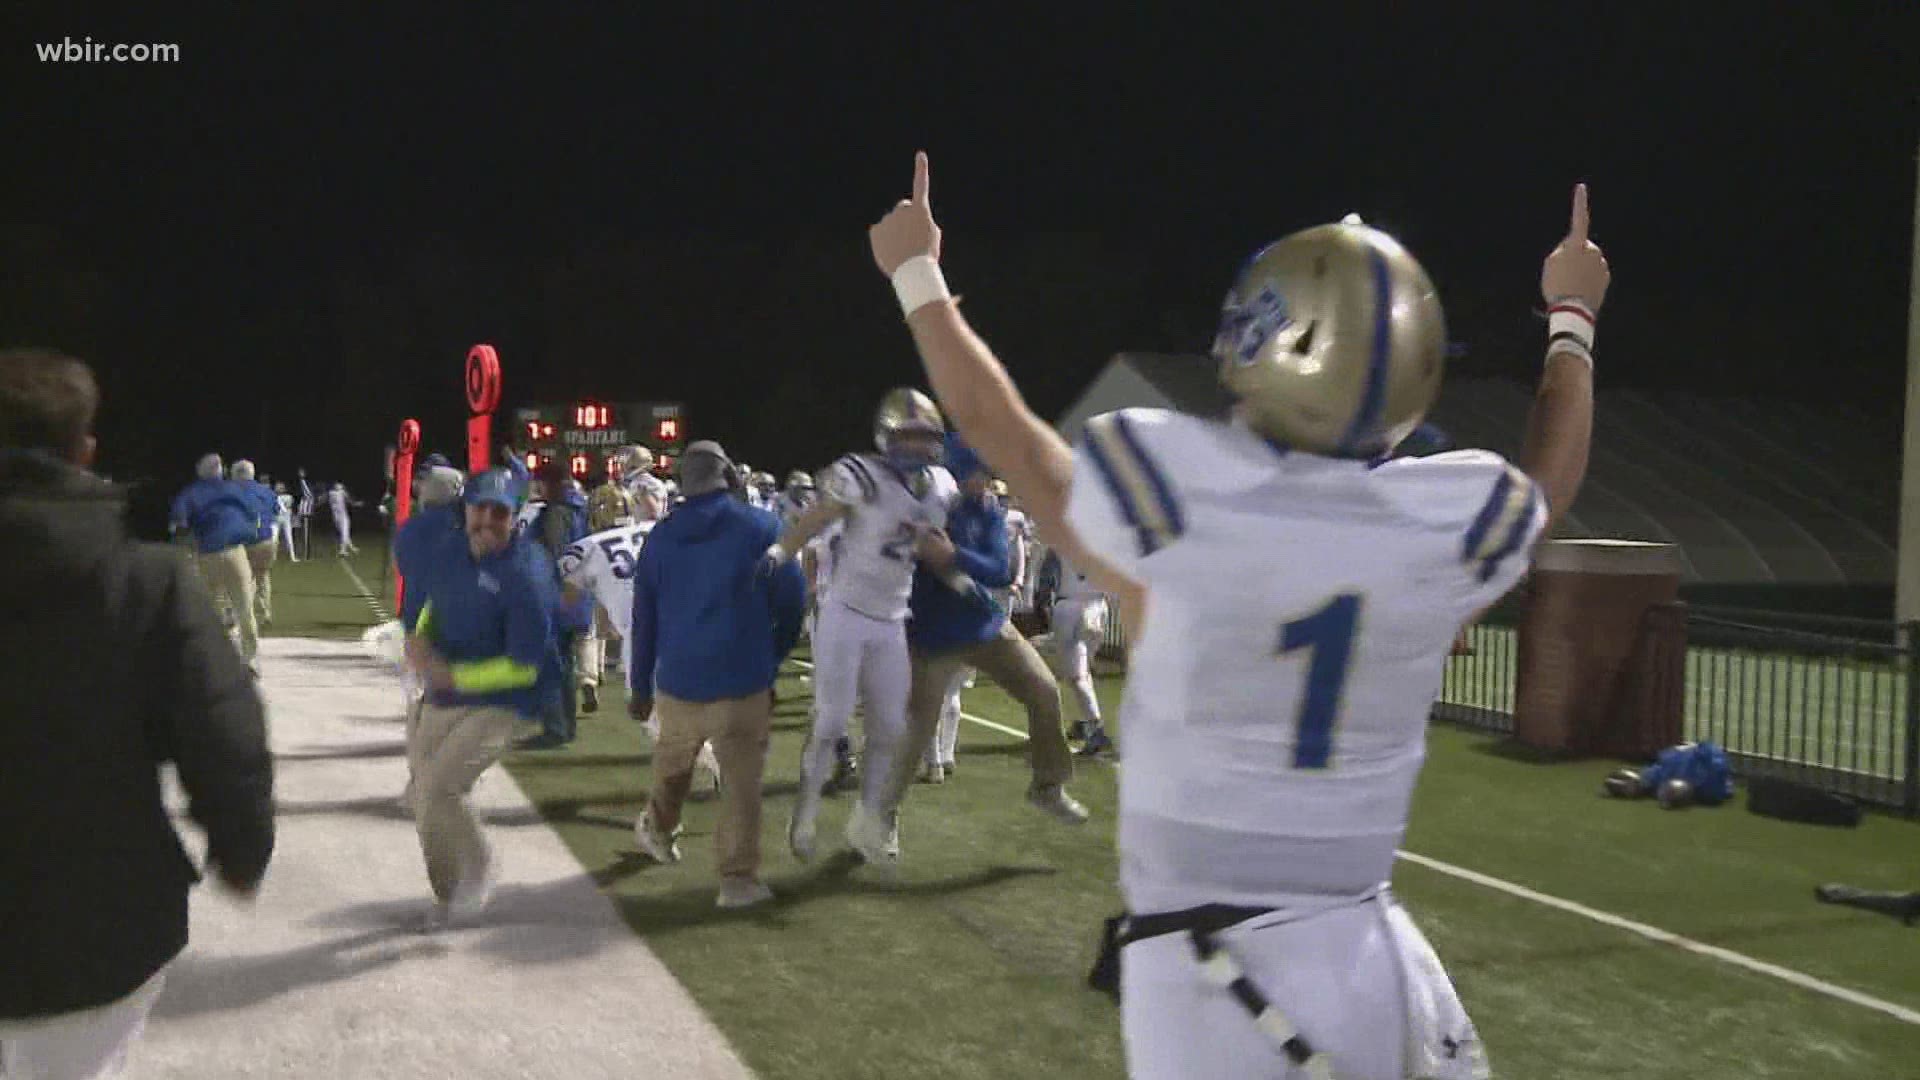 CAK stays undefeated, beating Webb on the road.